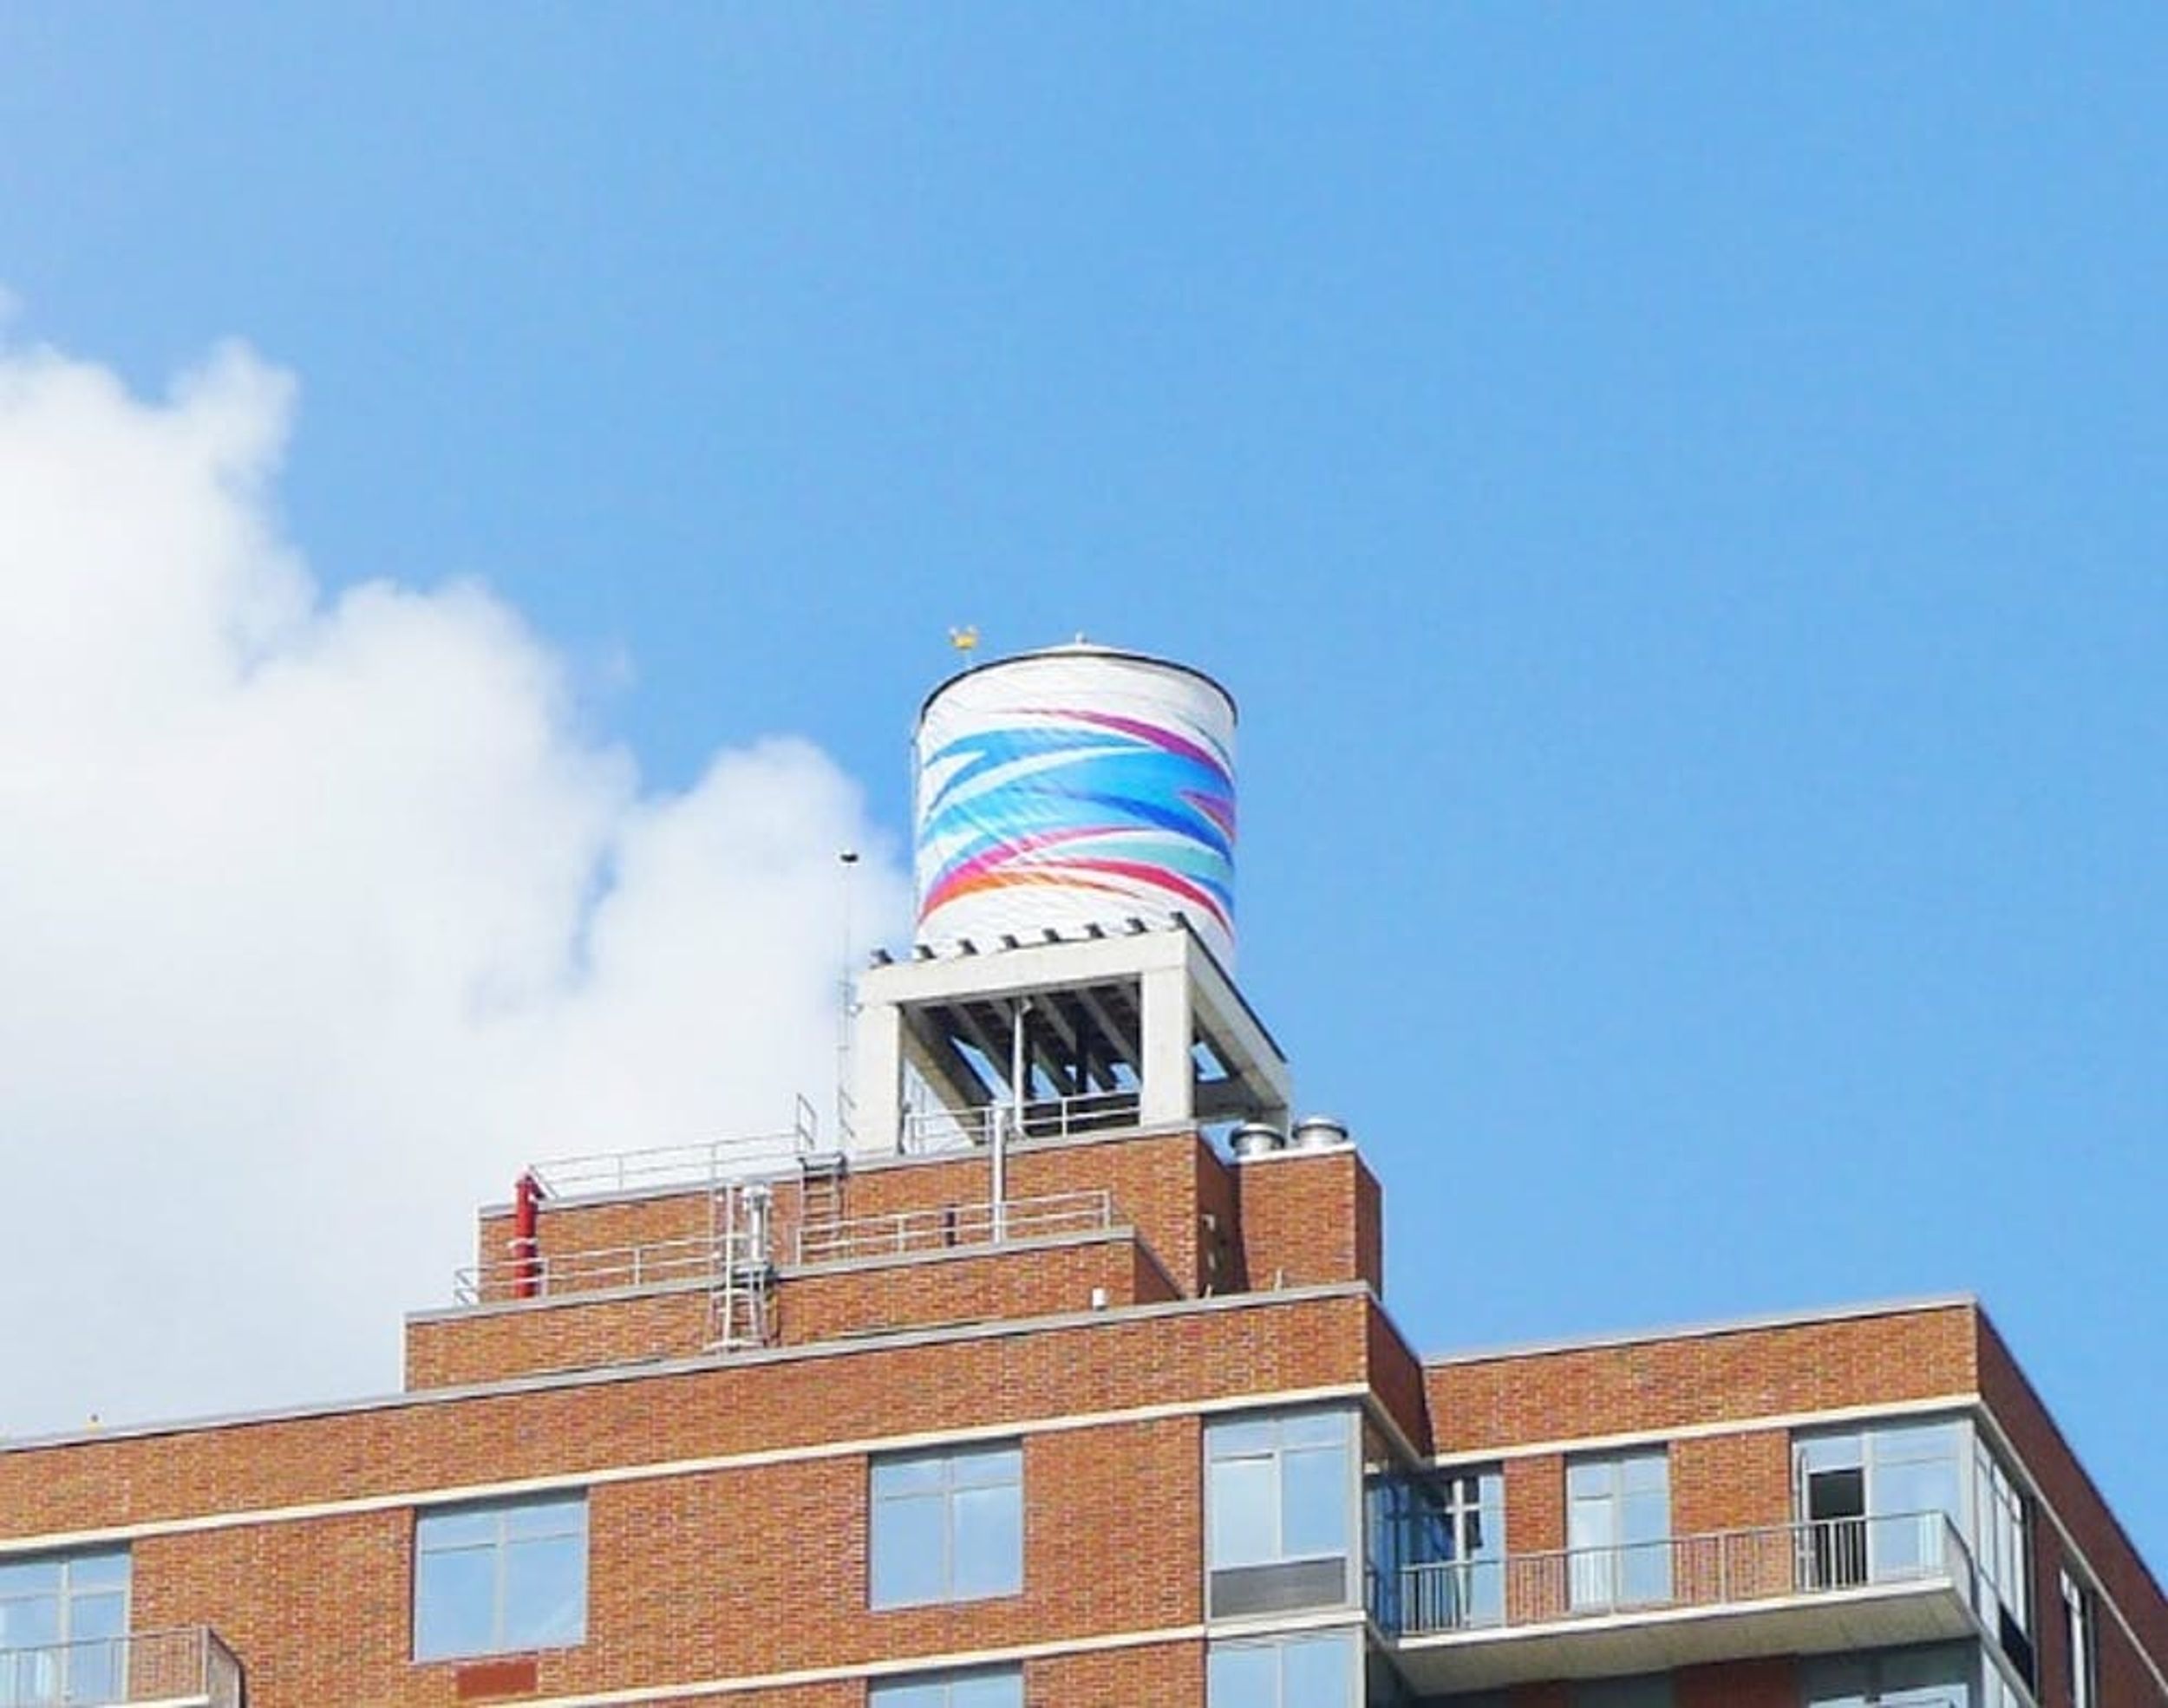 This Project Transforms NYC Water Towers into Works of Art